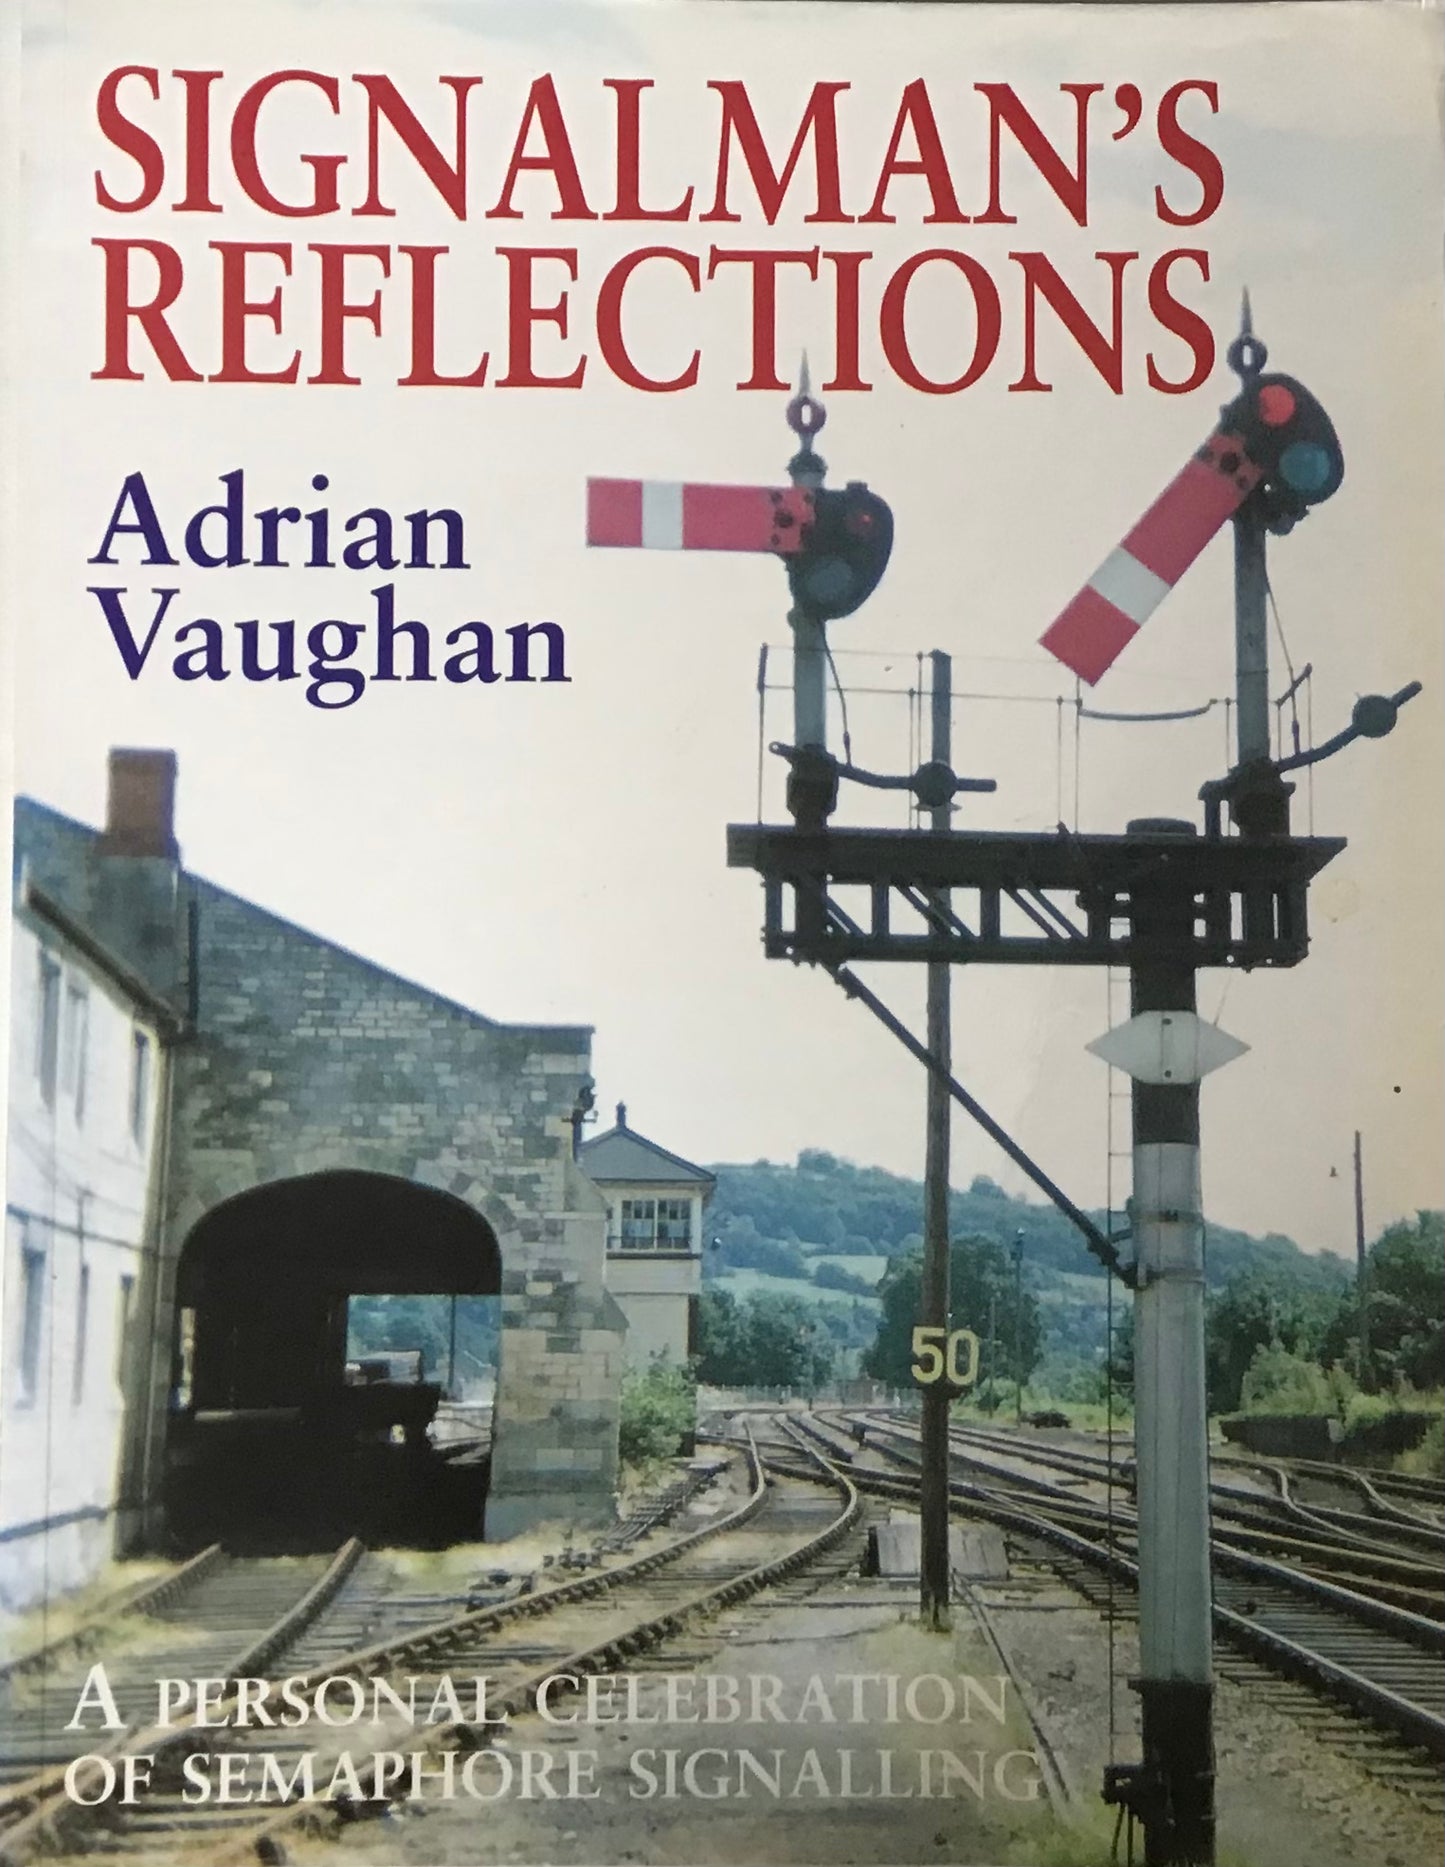 Signalman's Reflections - Adrian Vaughan - Chester Model Centre